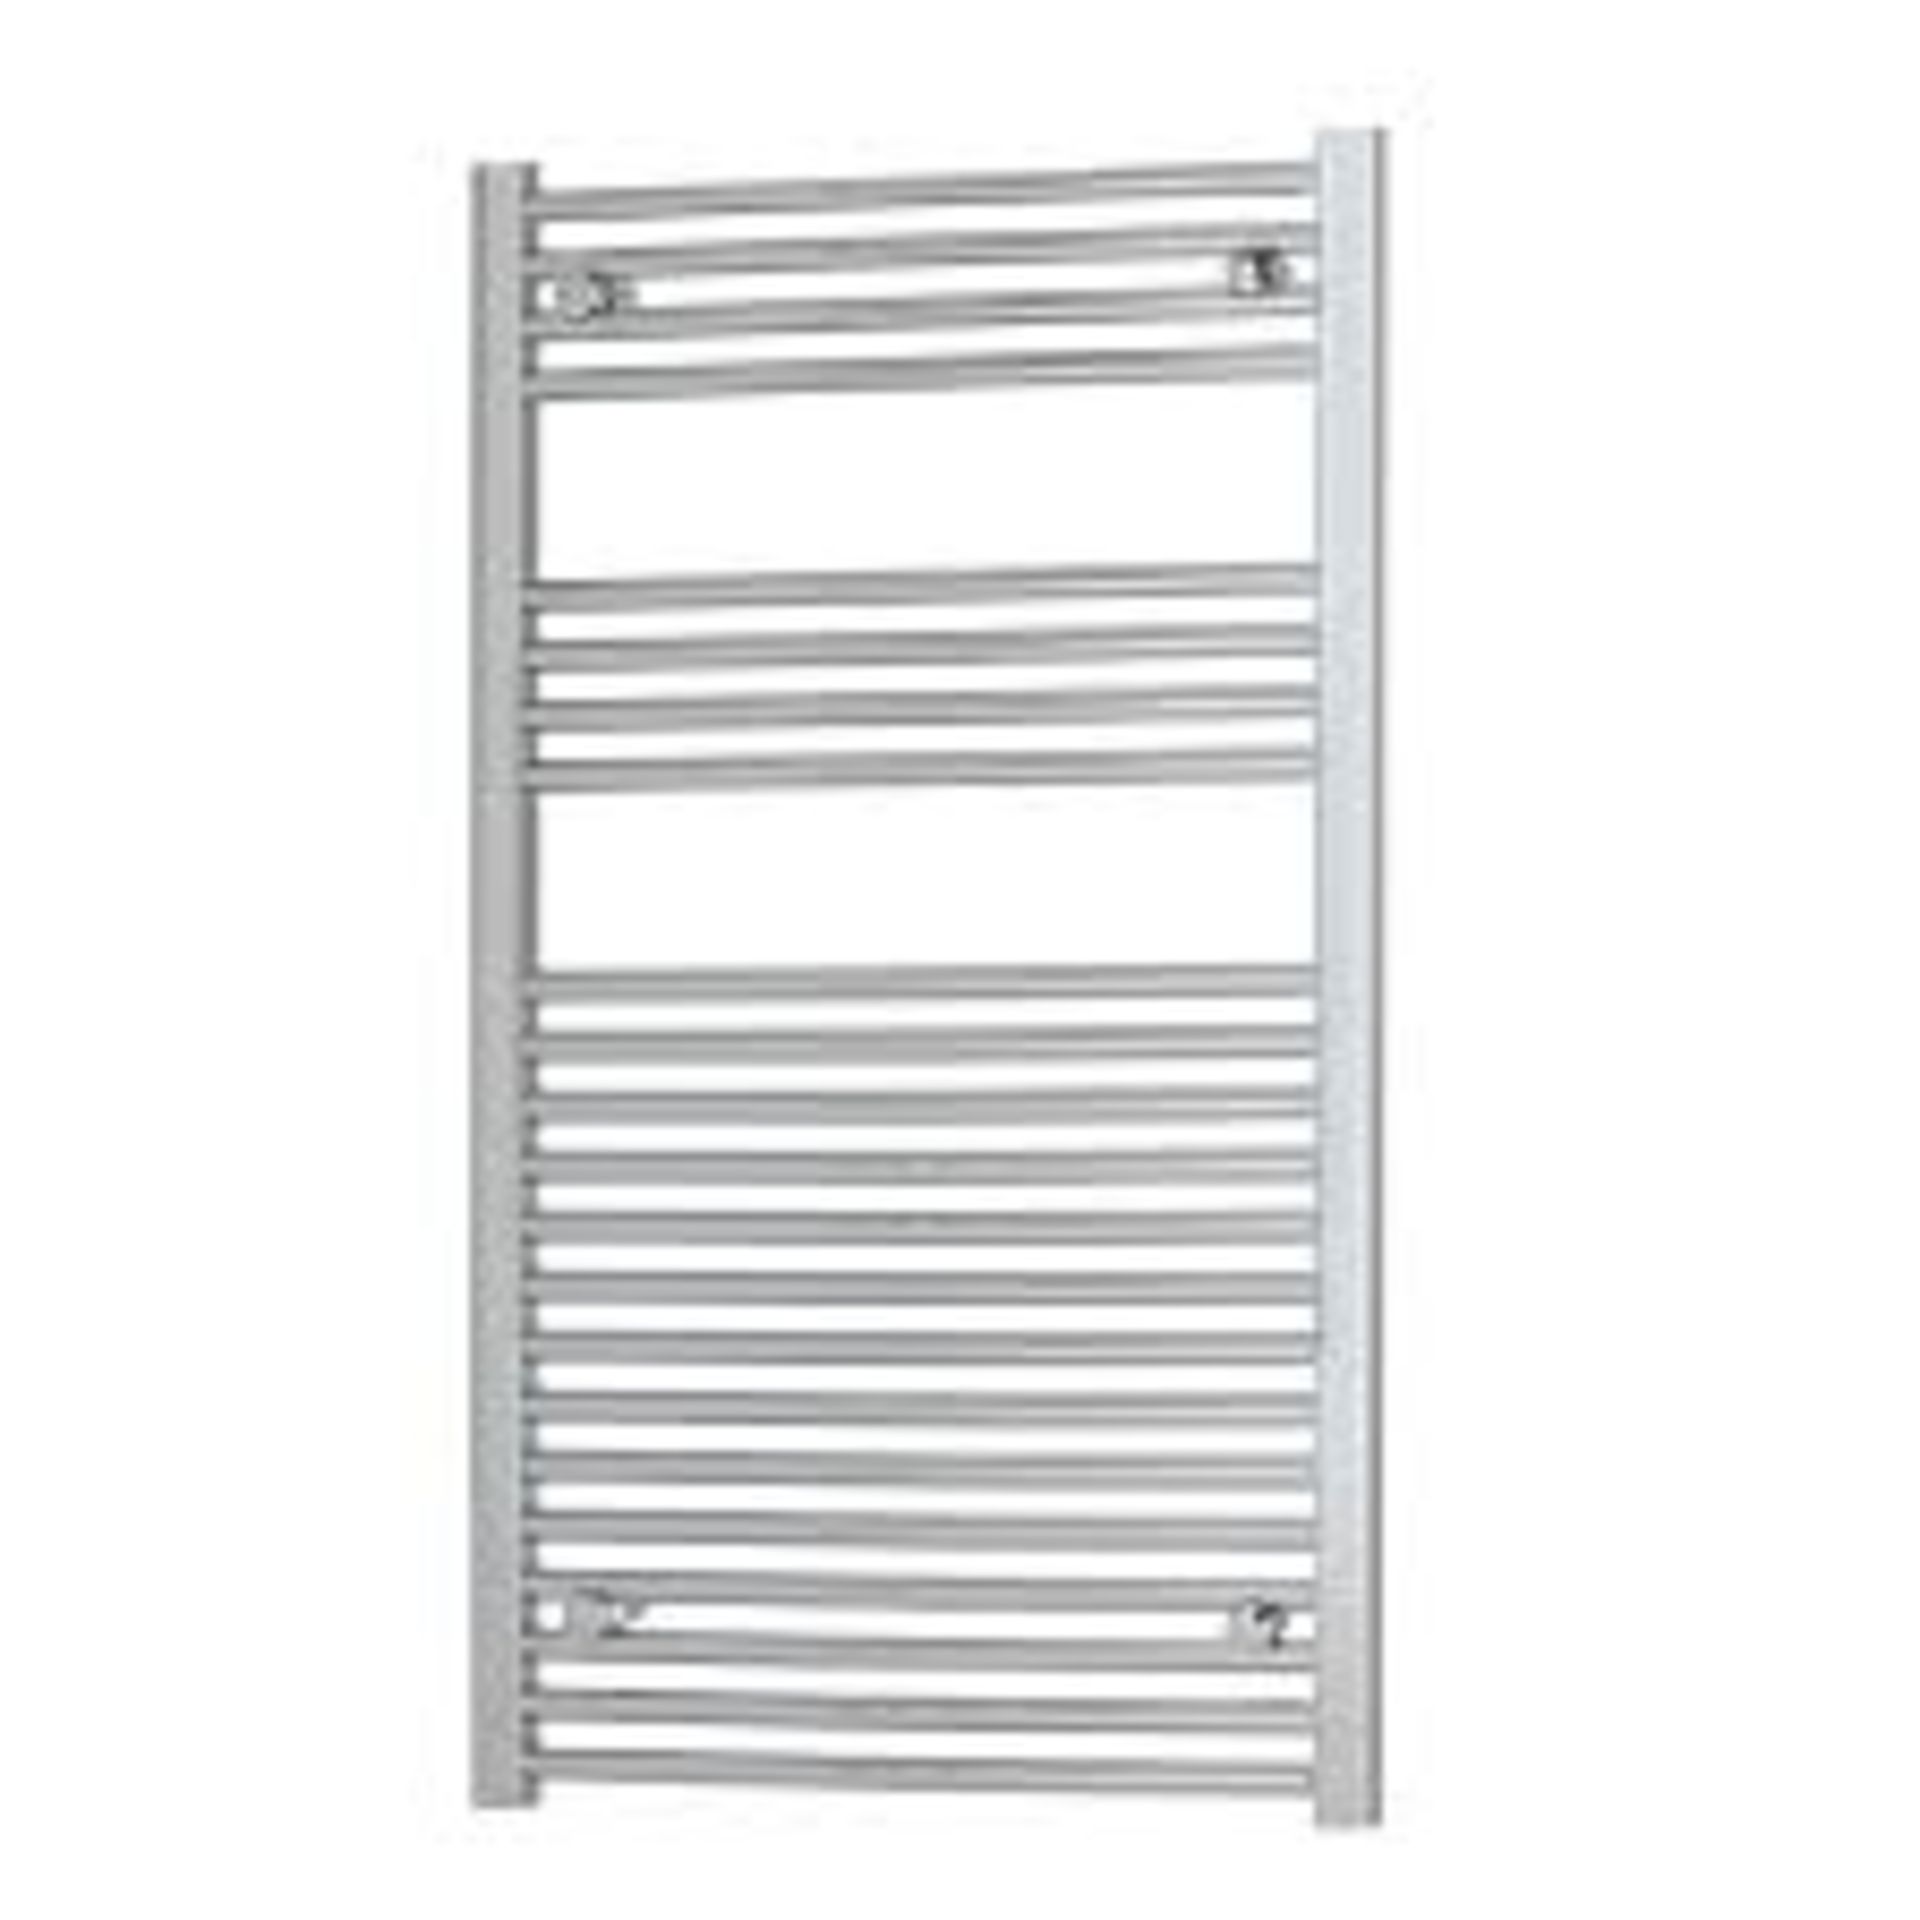 Curved Chrome effect Vertical Curved Towel radiator 600x1100mm. -ER48